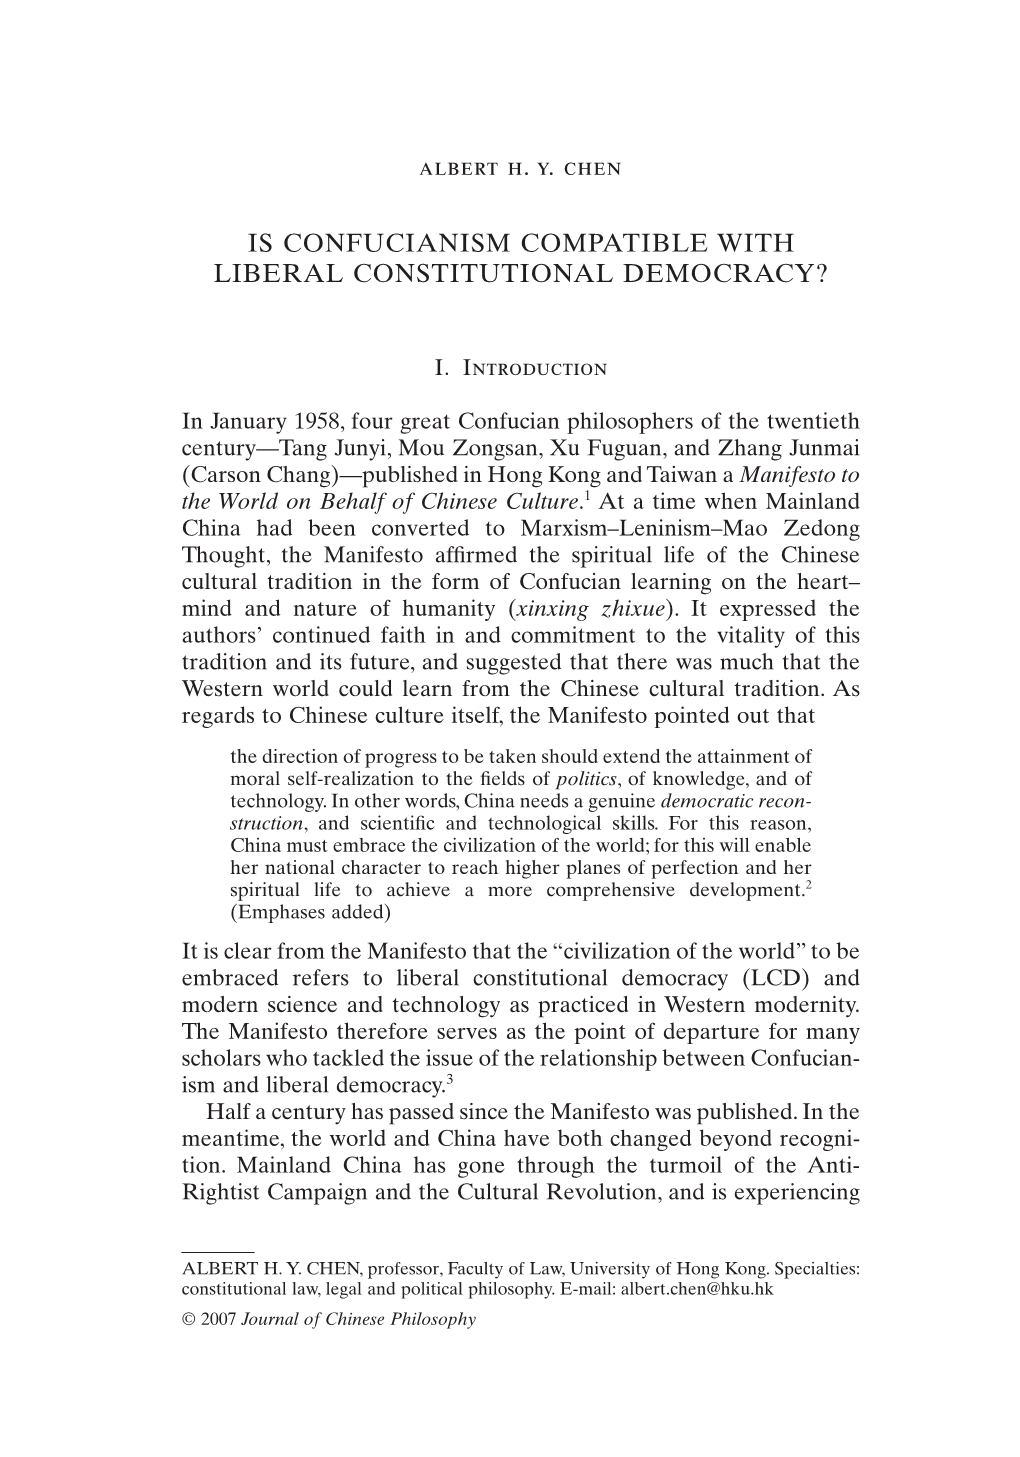 Is Confucianism Compatible with Liberal Constitutional Democracy?